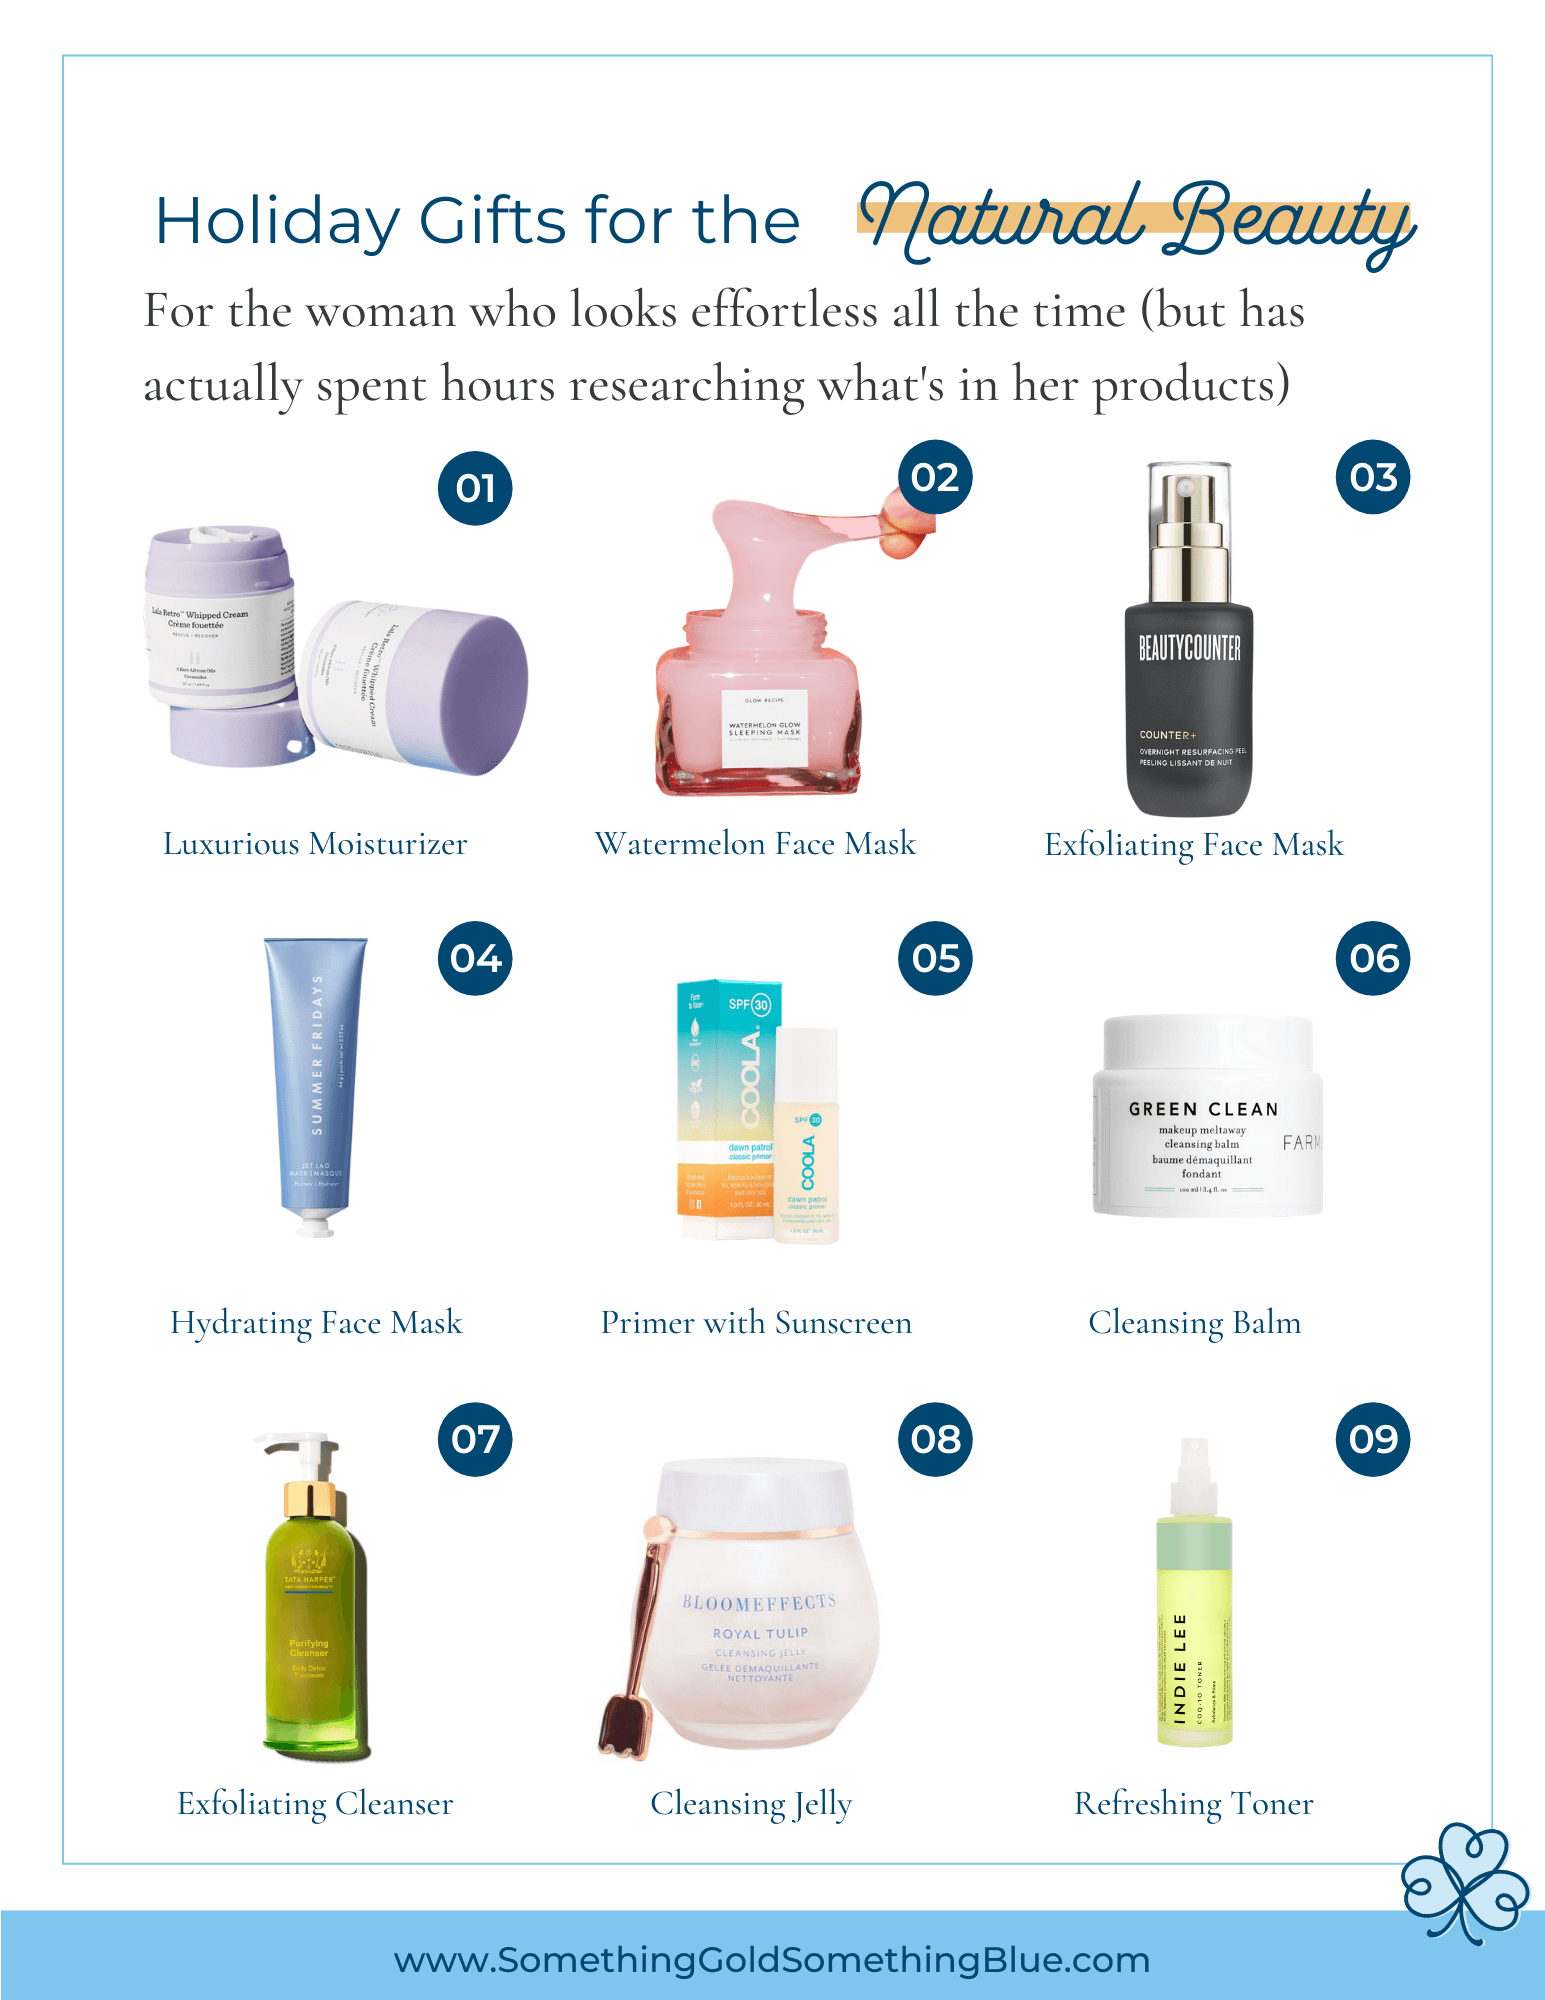 Holiday gift guide for the natural beauty and clean beauty enthusiast. These products do not contain harmful ingredients, but still pack a punch 